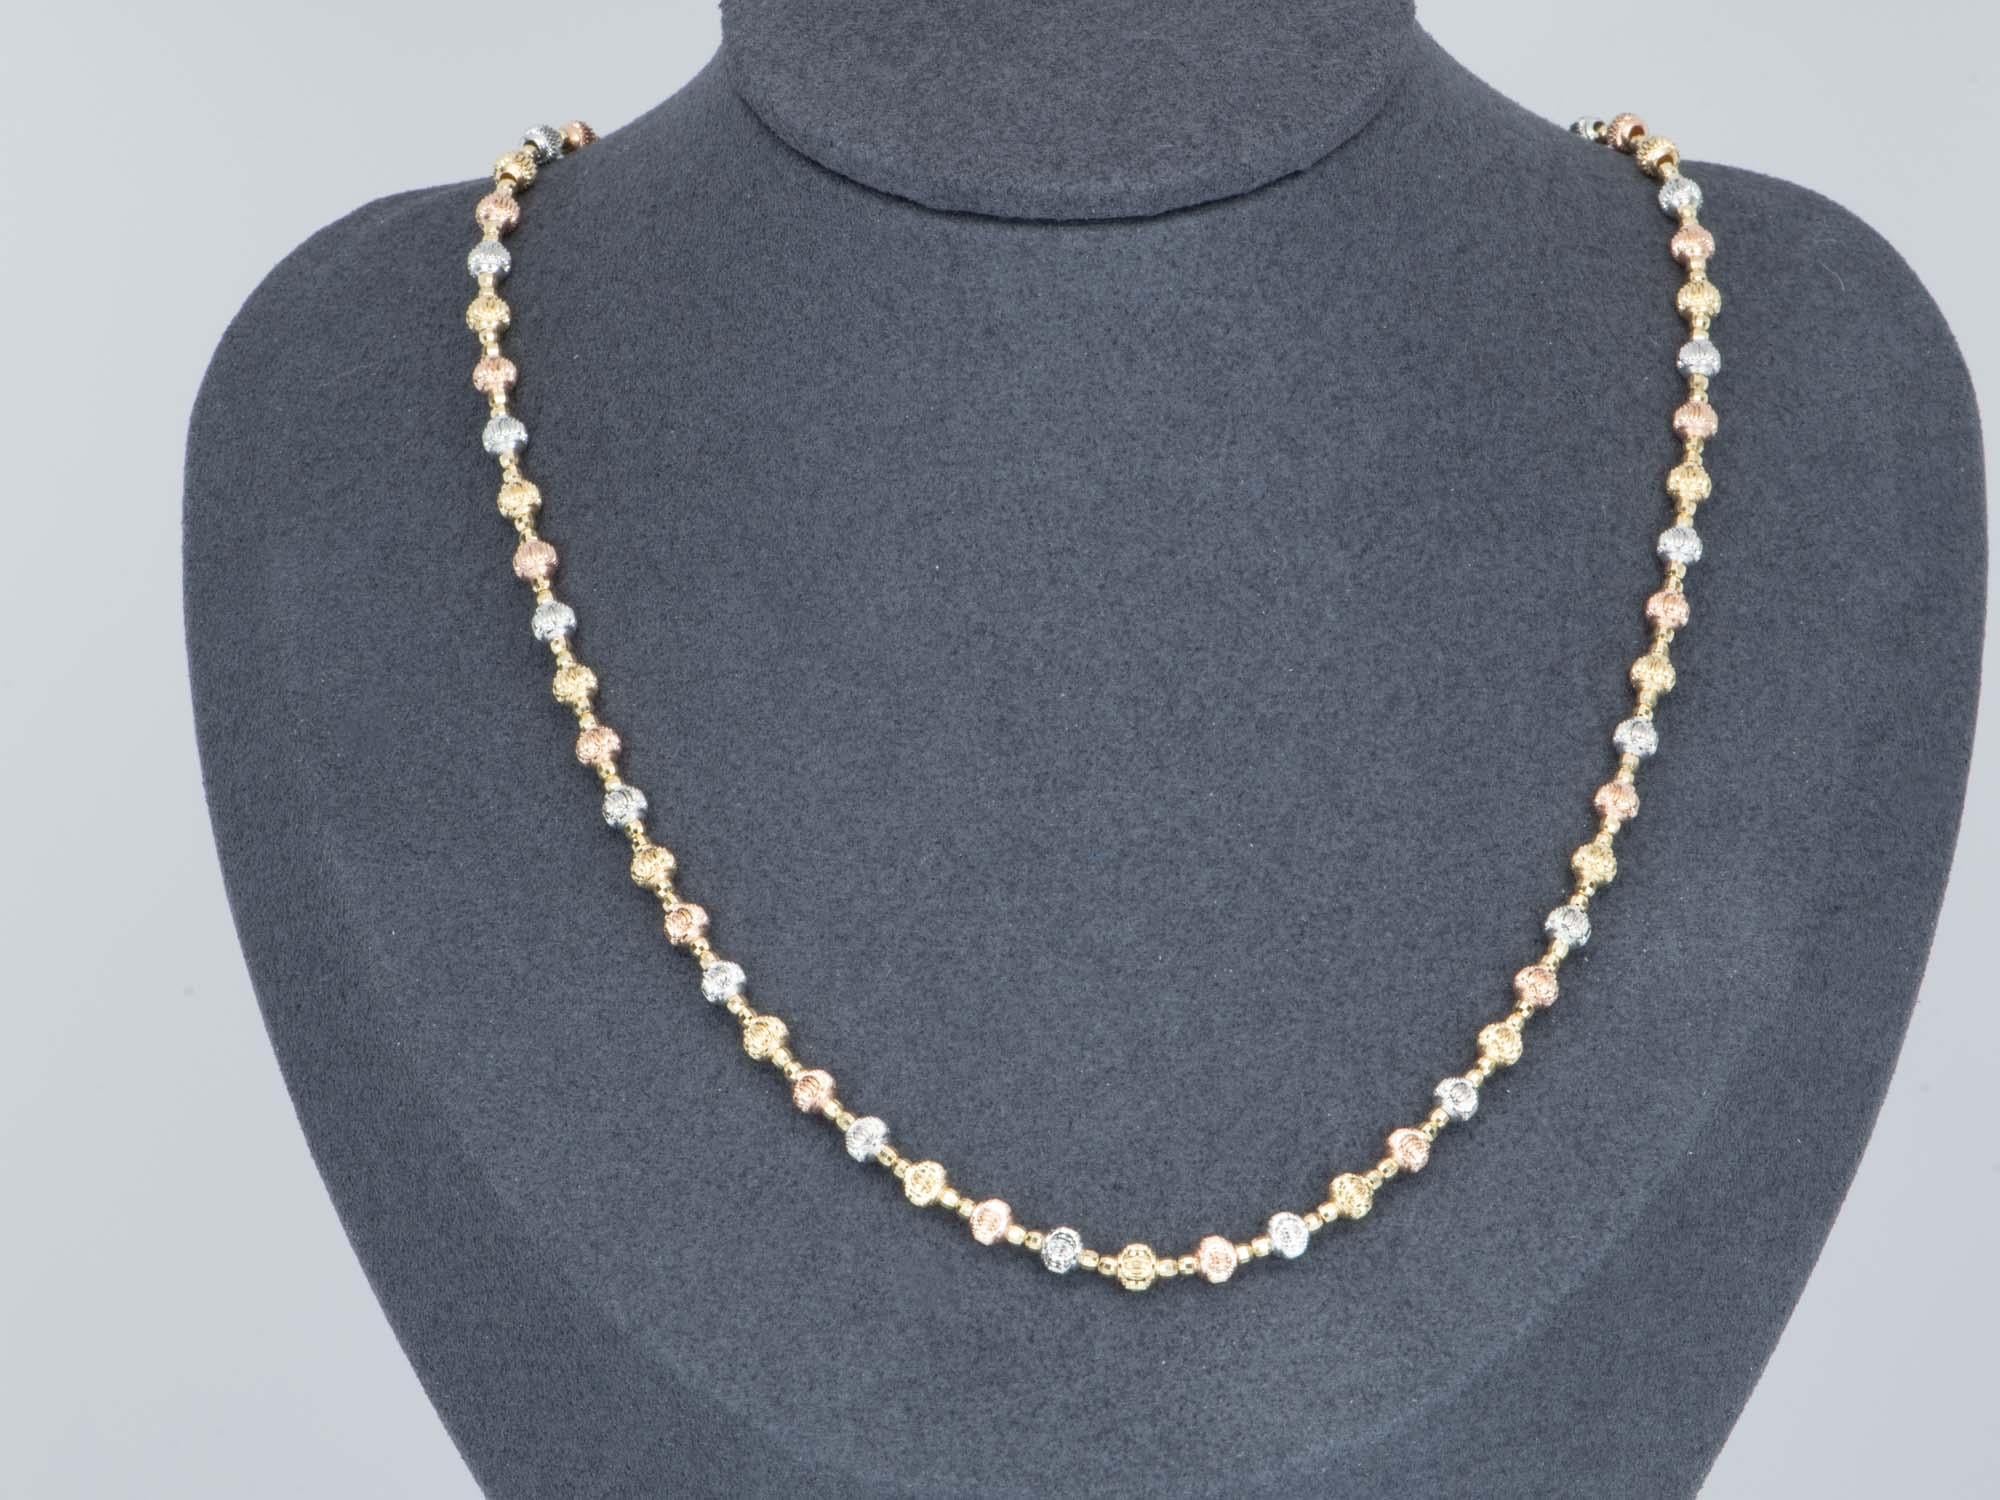   Adorn yourself with this stunning 18K gold necklace! Crafted with sparkling diamond cut beads ranging in three glistening gold colors, this 11g+ necklace is sure to draw all eyes. Embrace your elegance and sparkle on with this gorgeous piece!

♥